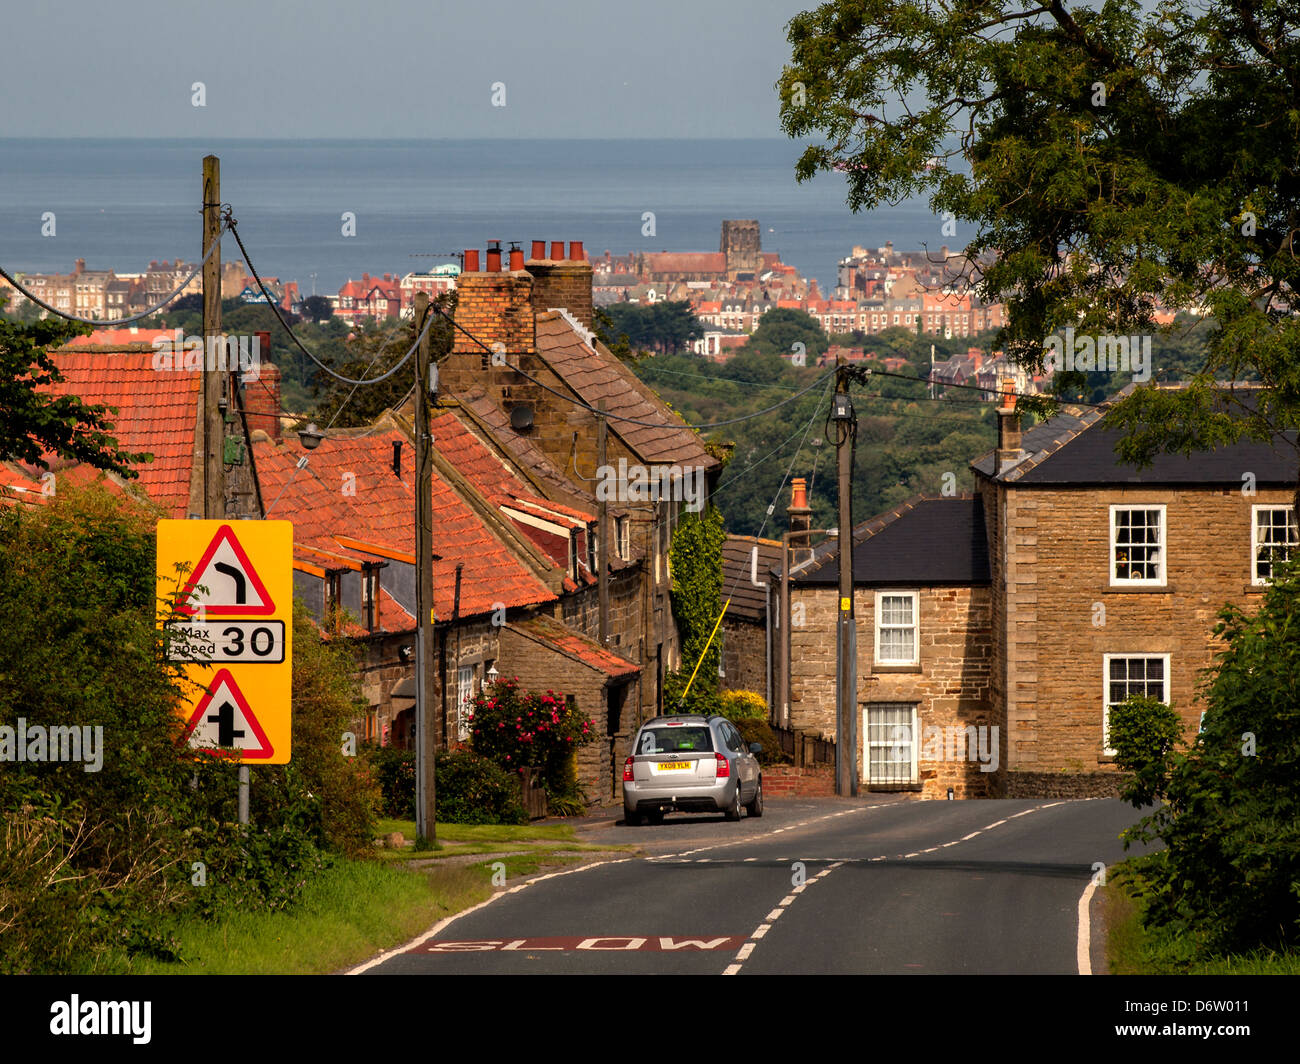 The village of Sneatonthorpe  Sneaton  near Whitby (in background) near where a Potash Mine is proposed on the edge of the Moors Stock Photo